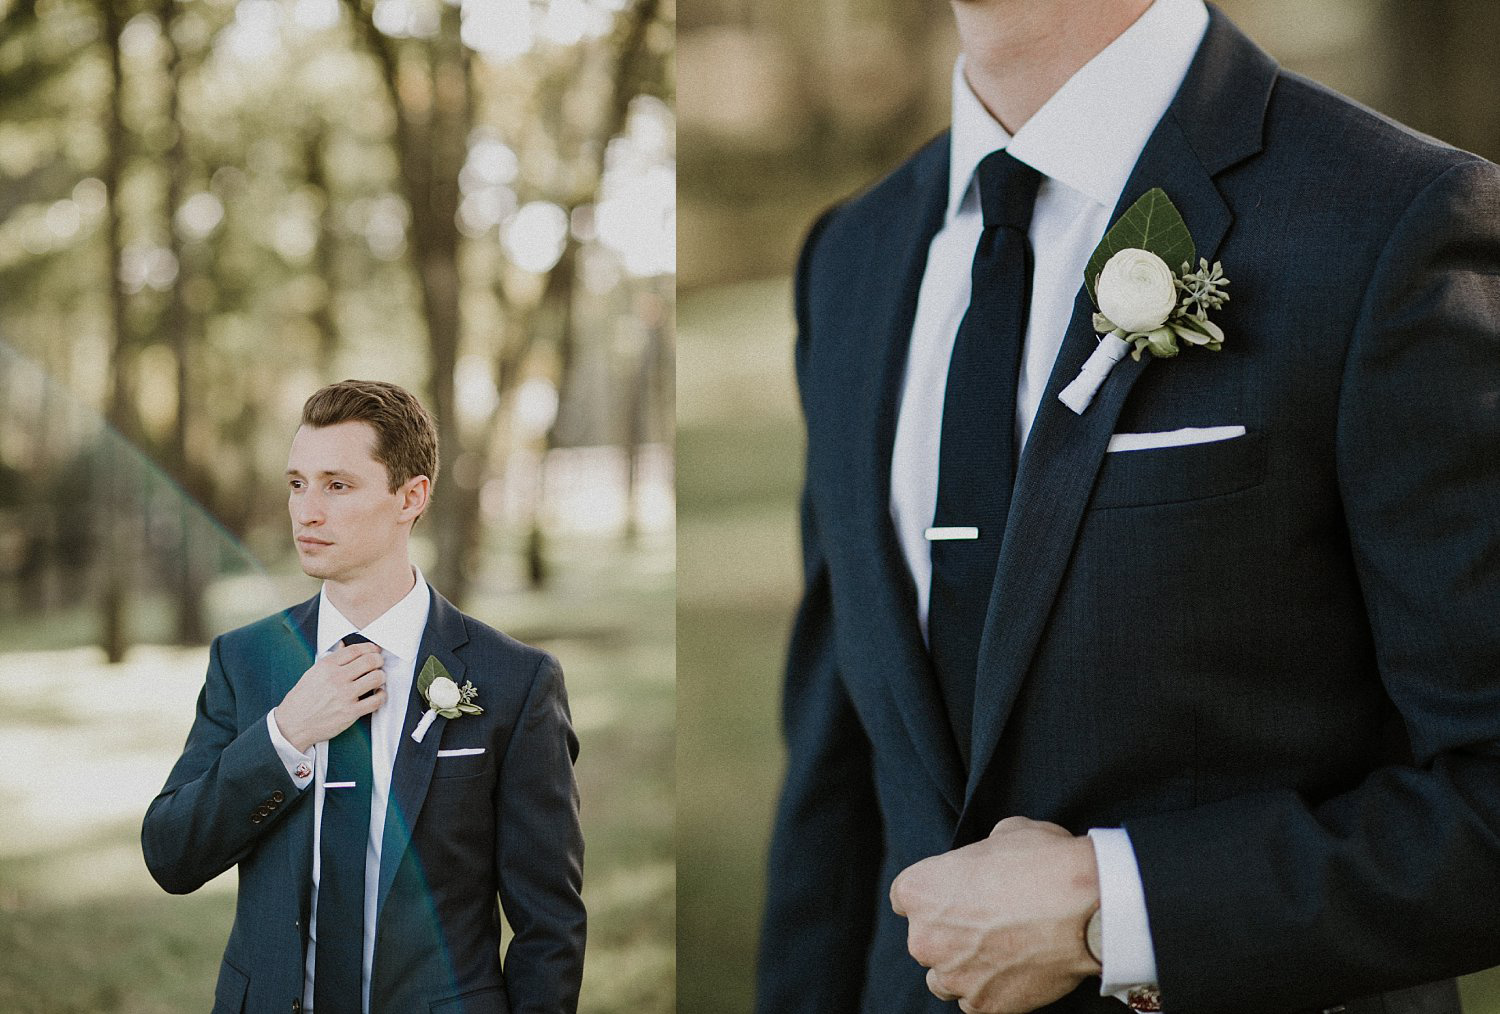 Groom wearing a white ranunculus and black tie with a tie clip at this outdoor wedding